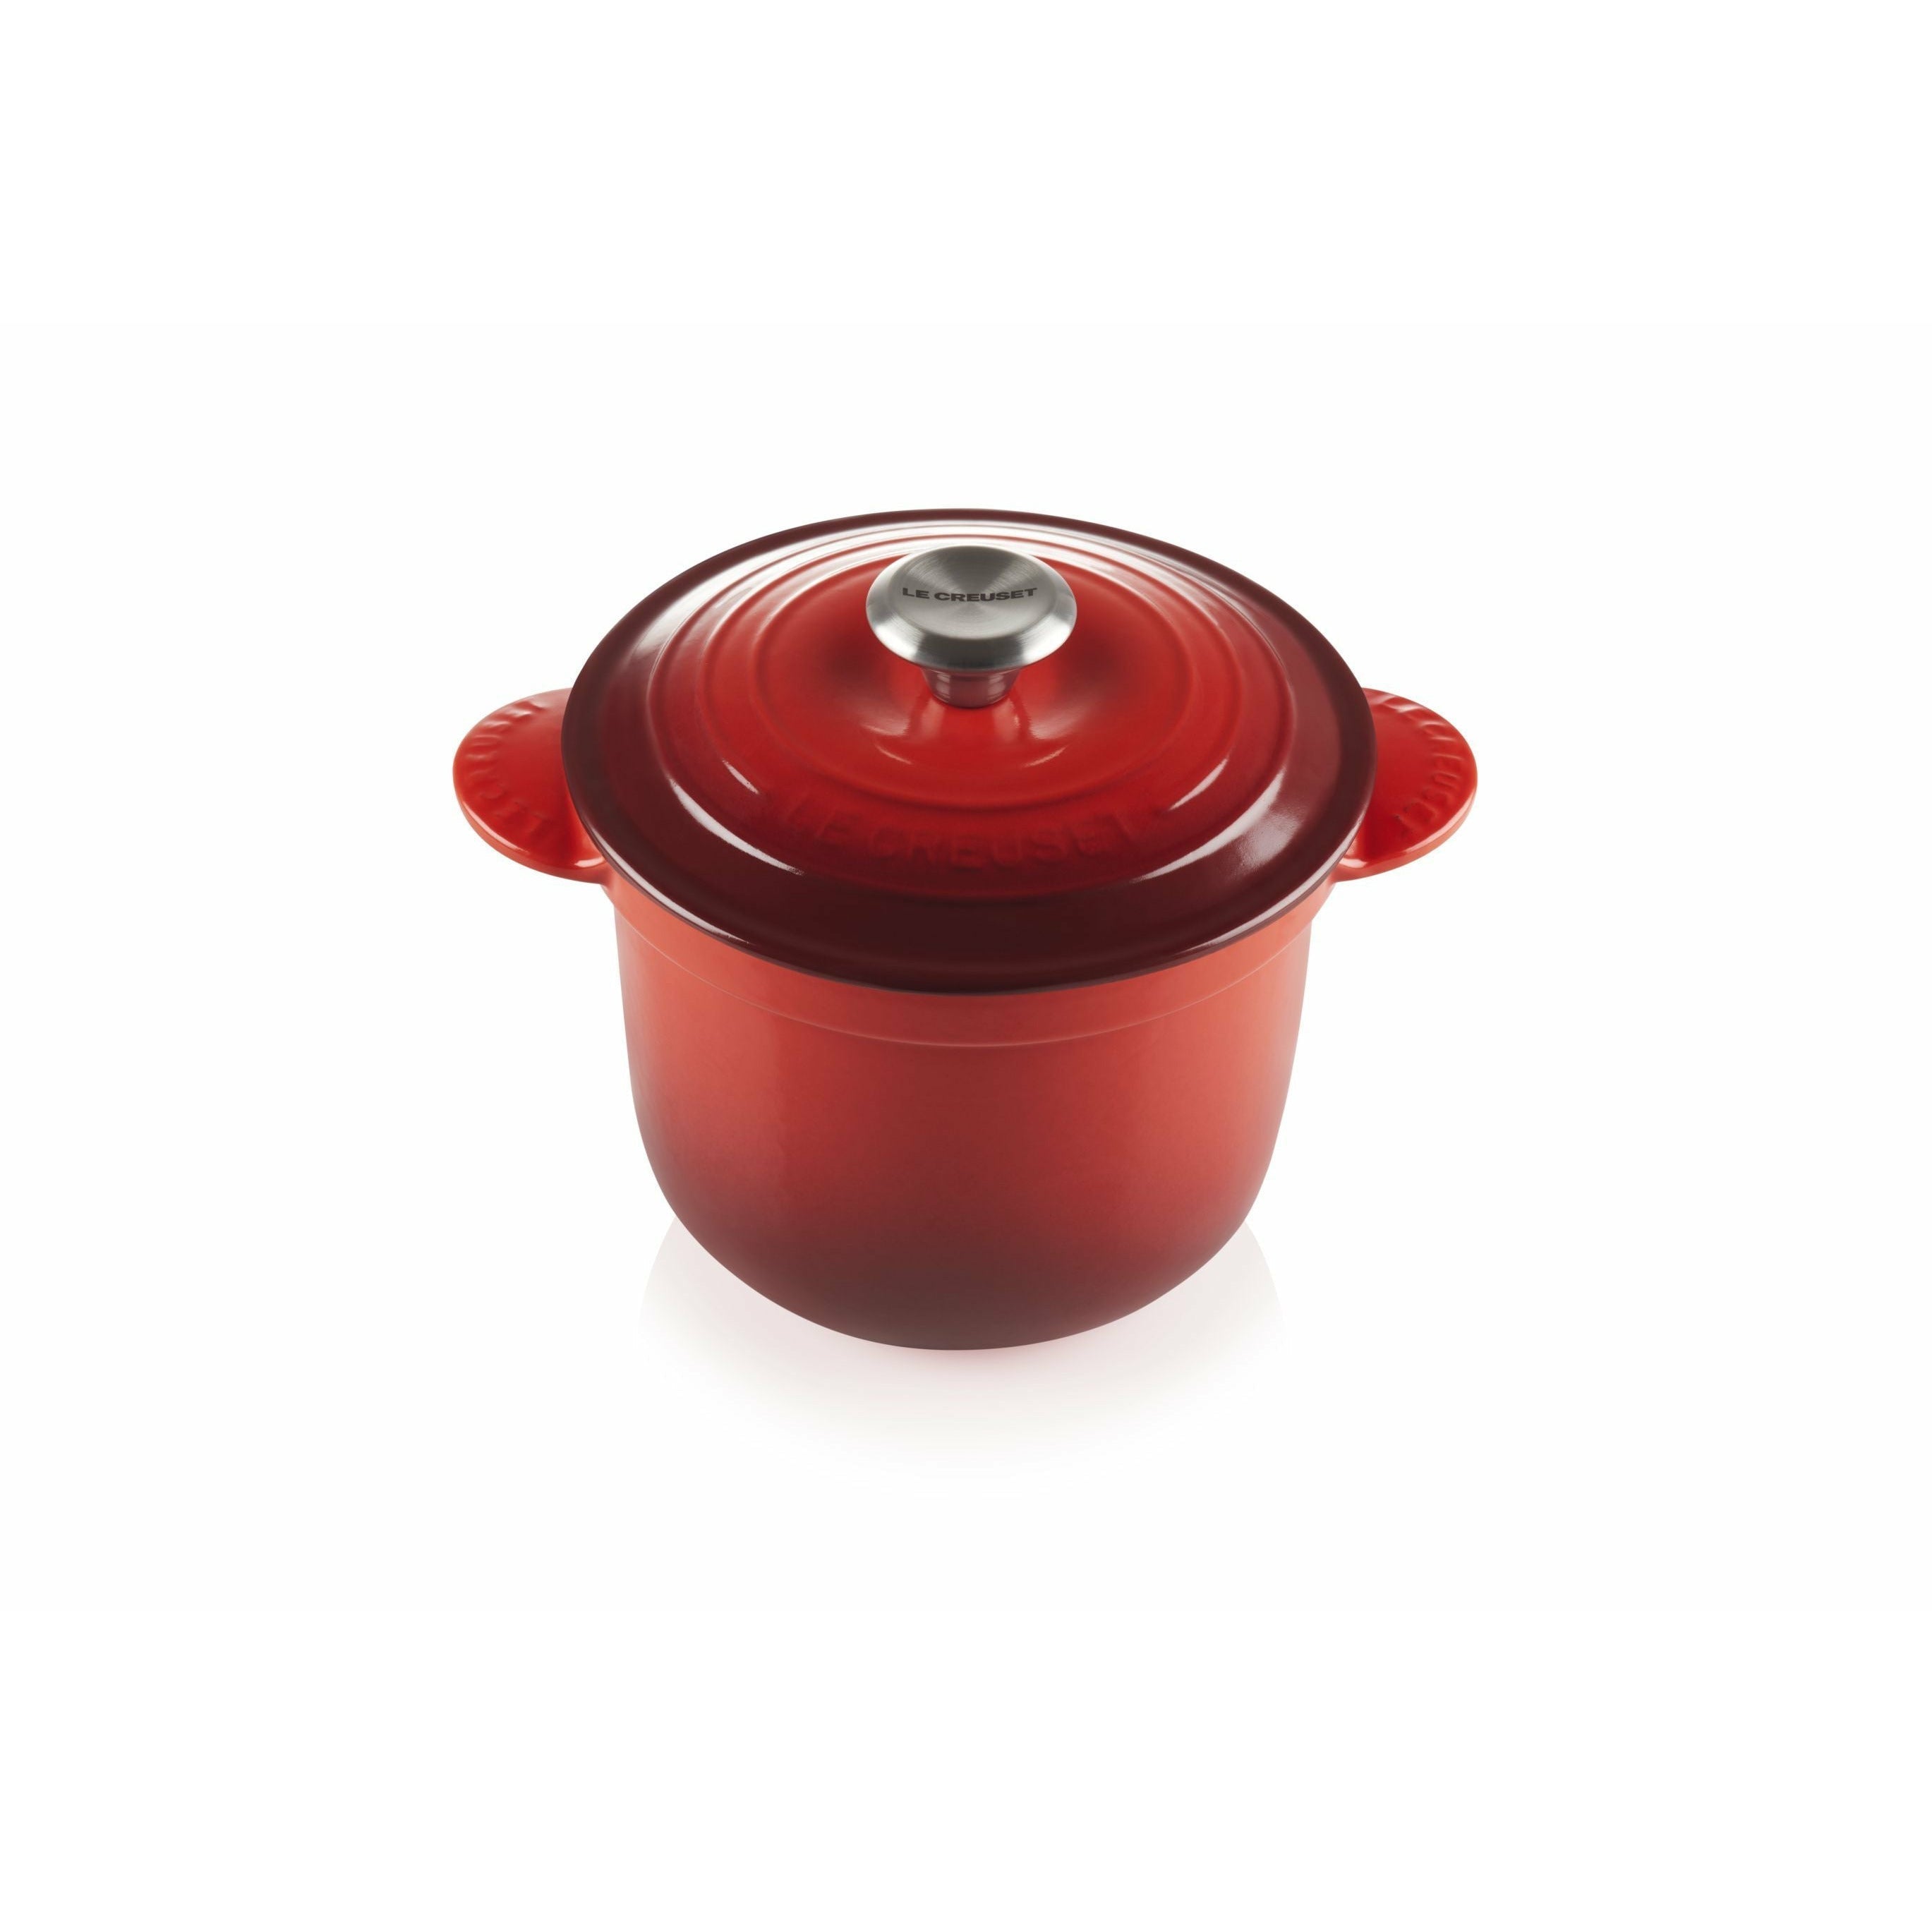 Le Creuset Cocotte Every With Poteriedeckel 18 Cm, Cherry Red